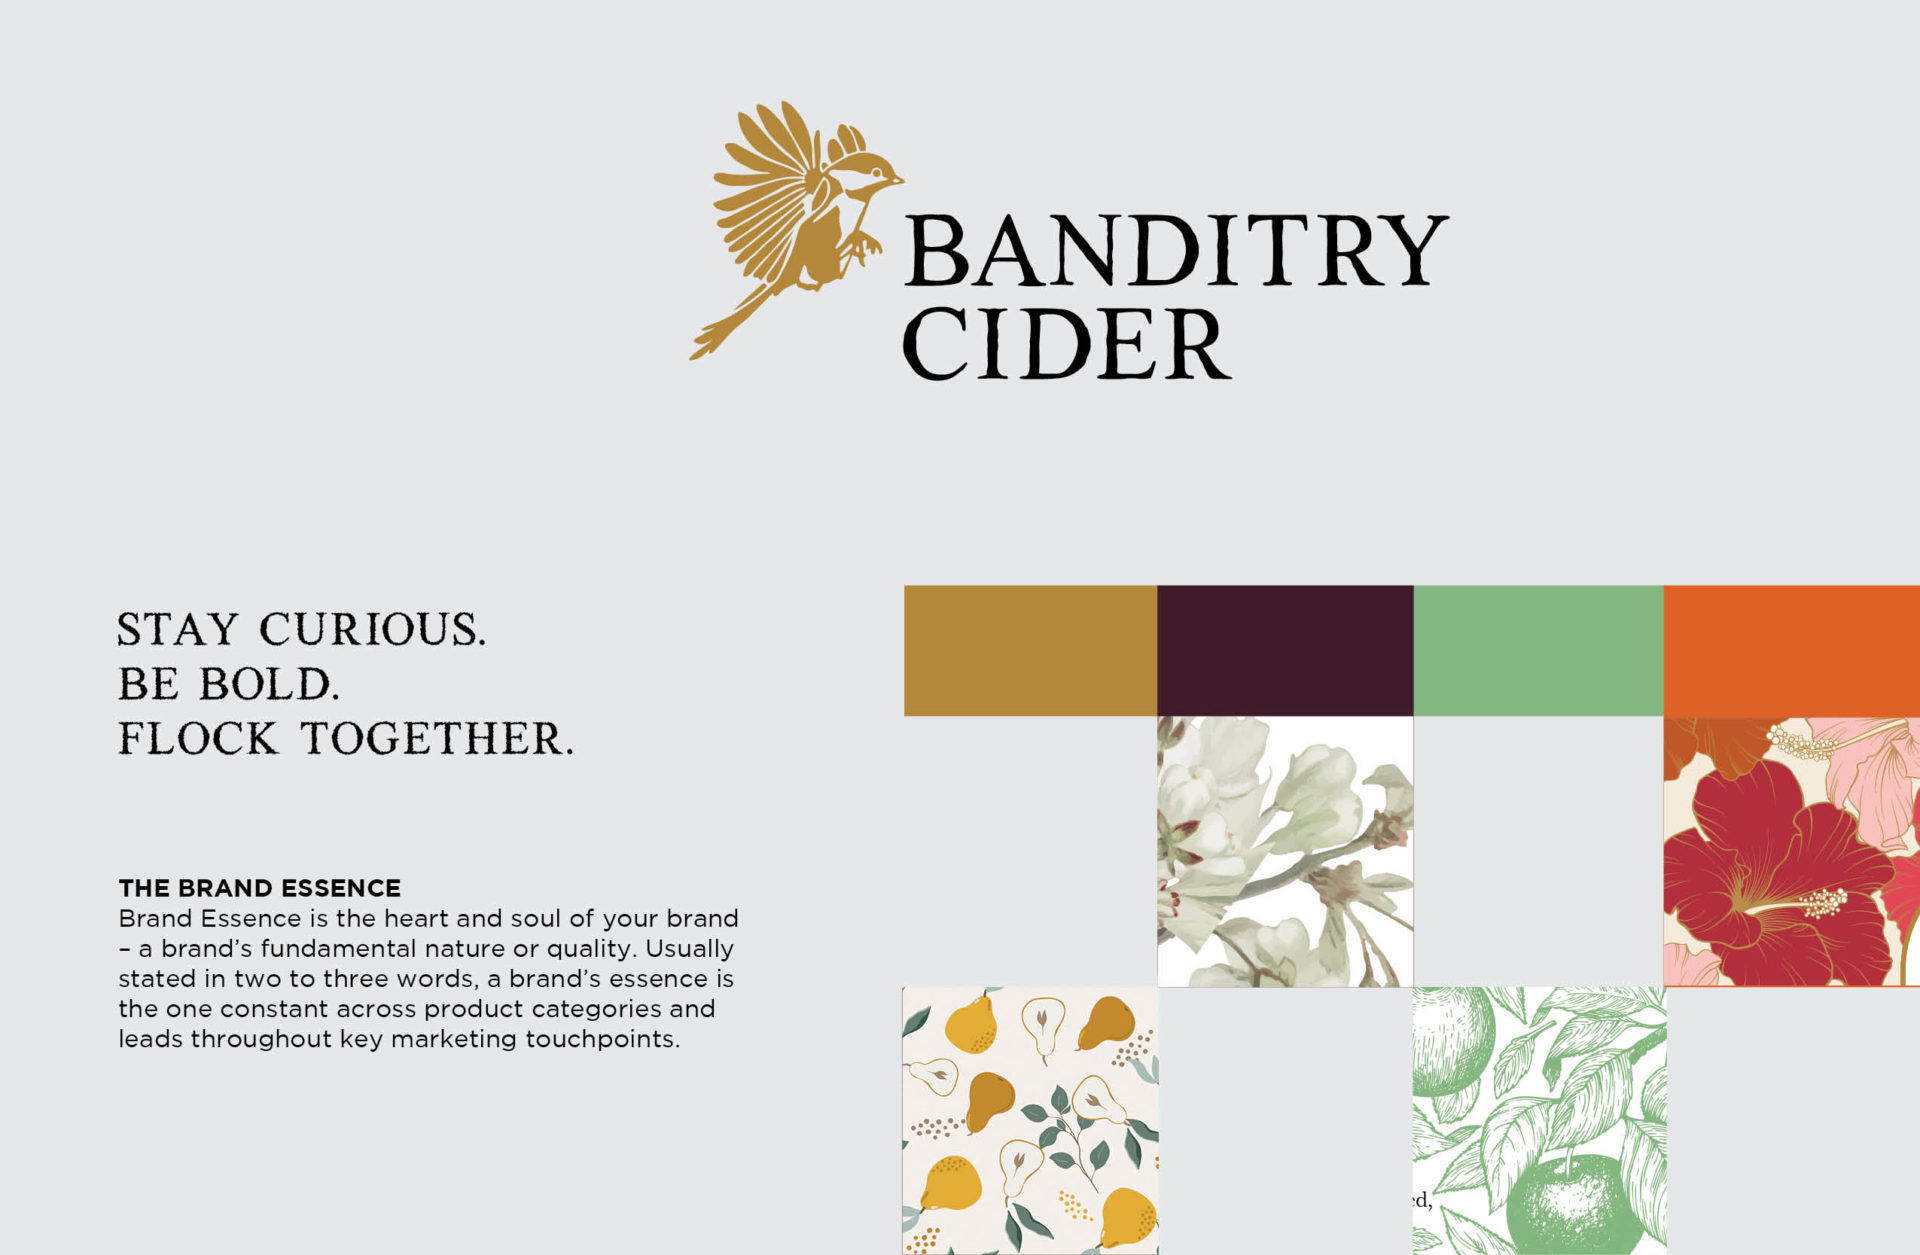 Banditry Cider Branding Guidelines page showing colour palette and tagline